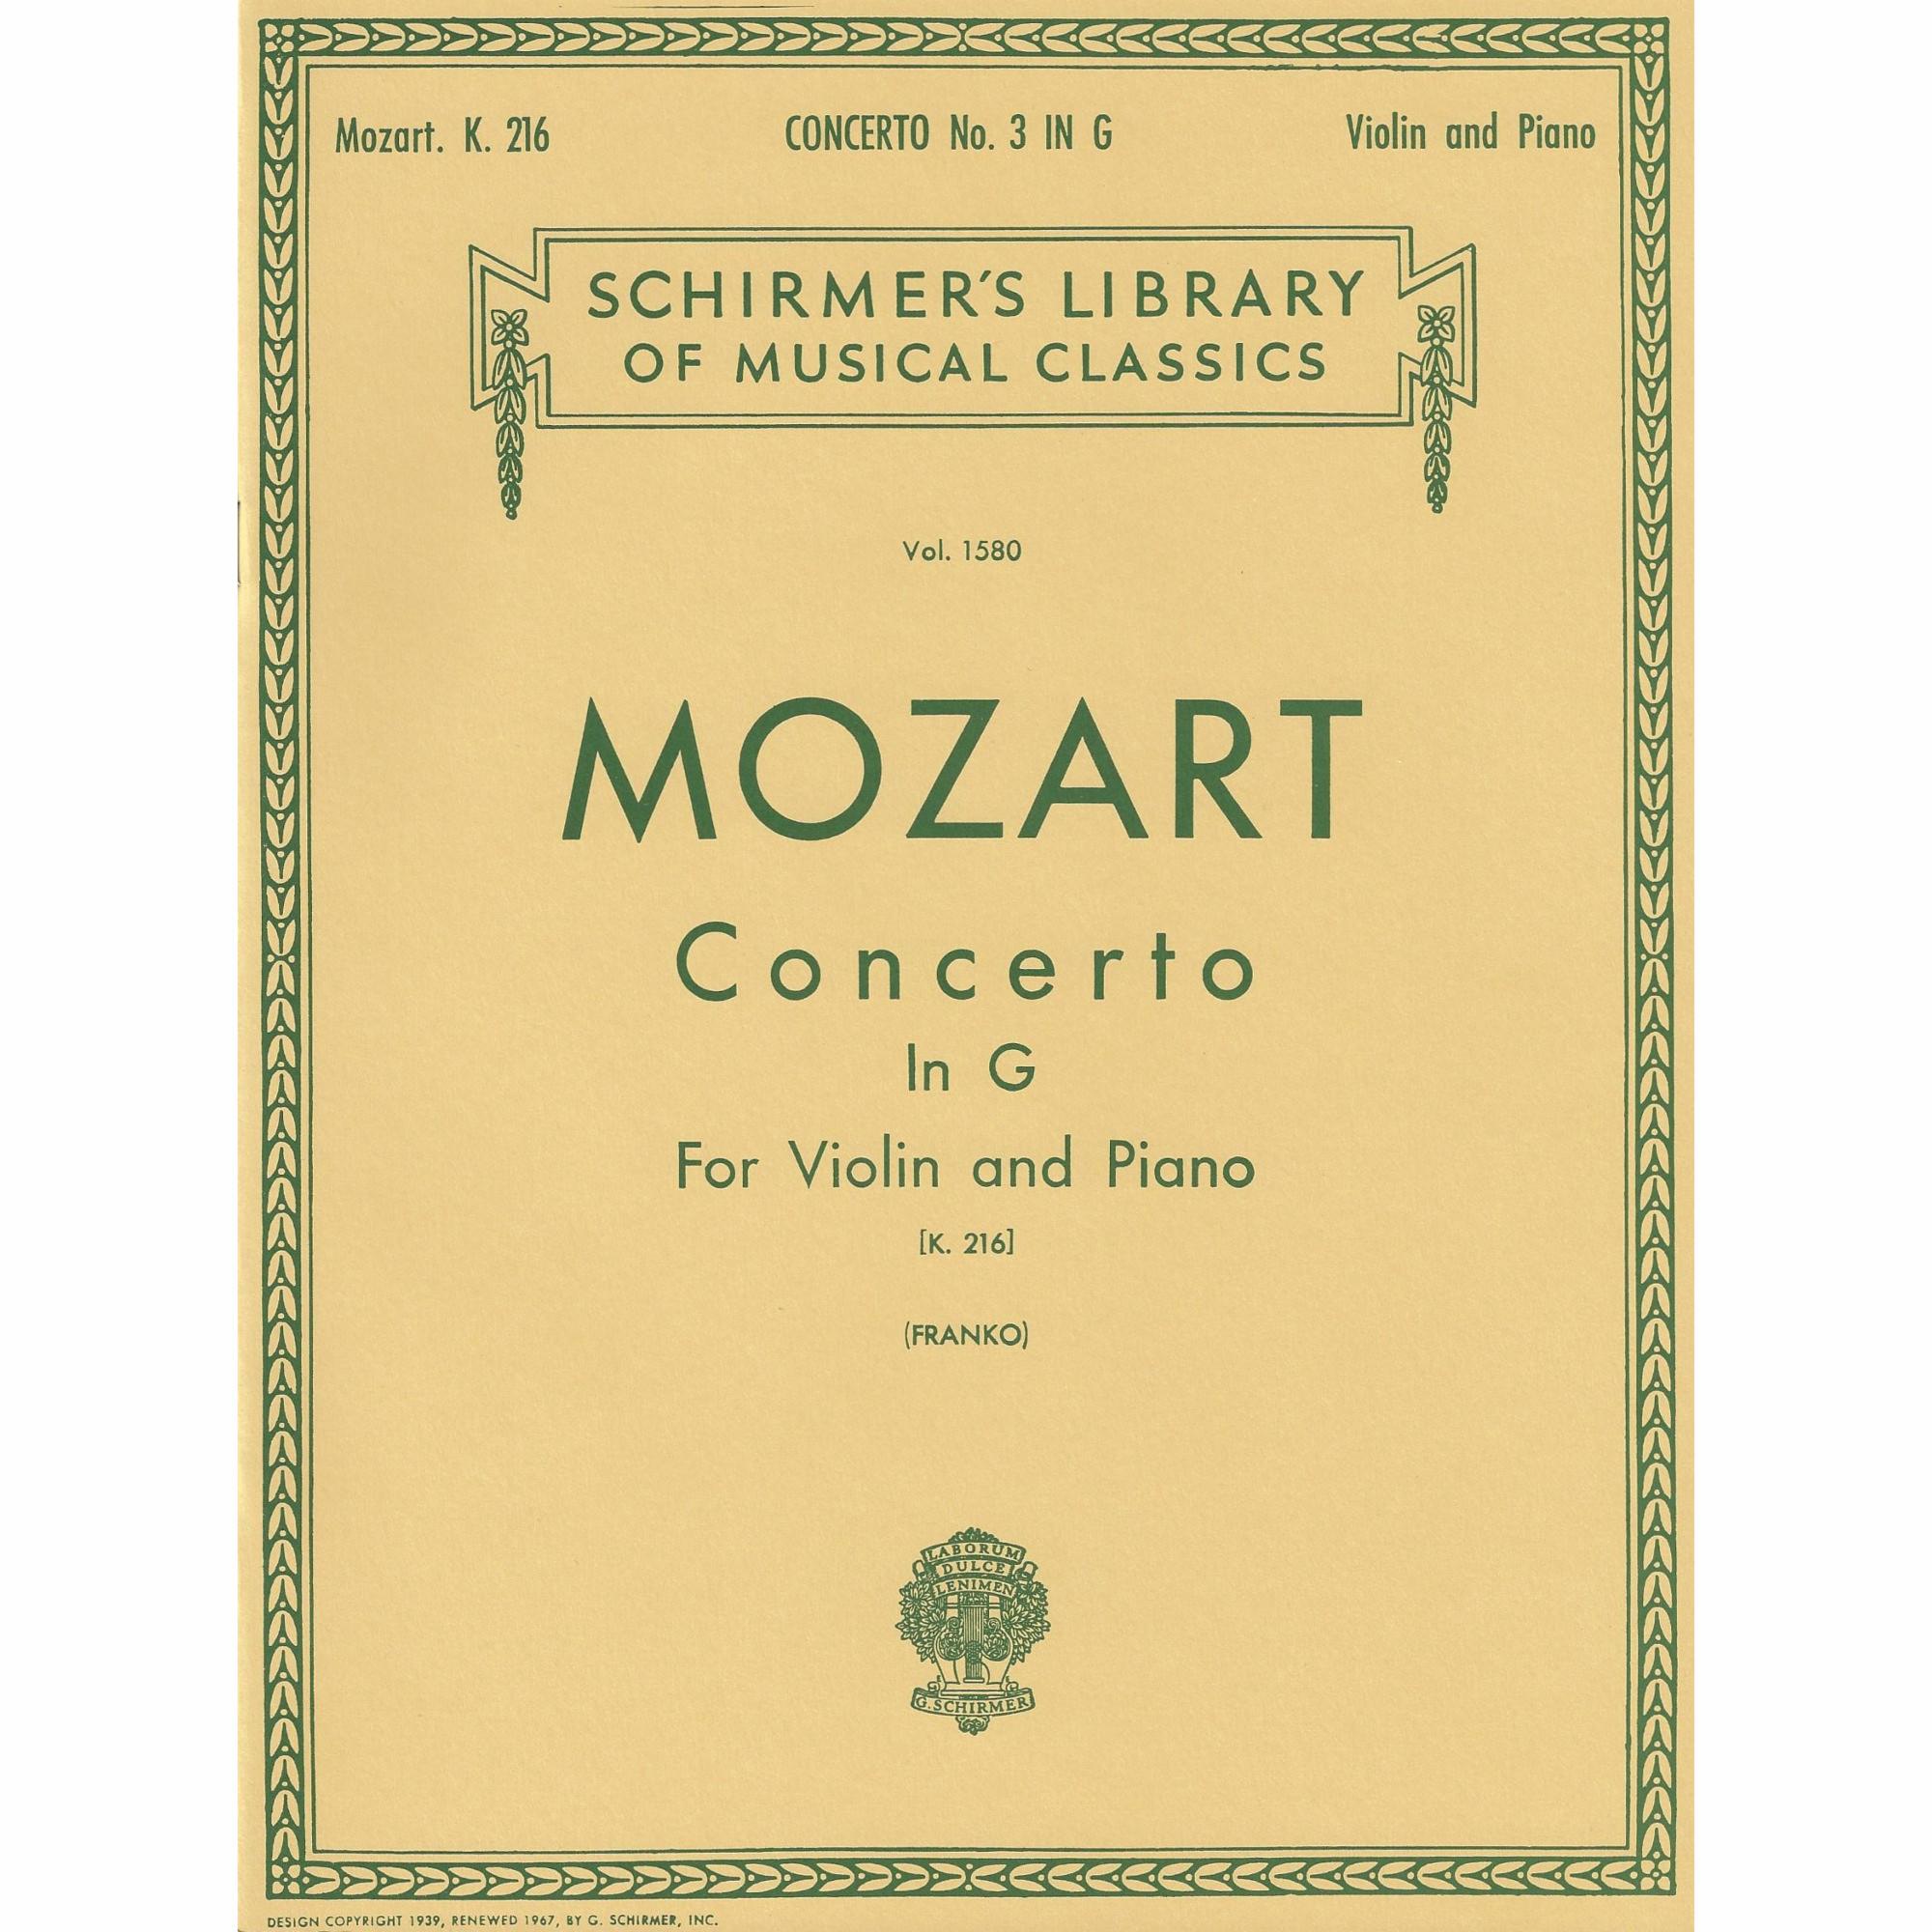 Mozart -- Concerto in G Major, K. 216 for Violin and Piano